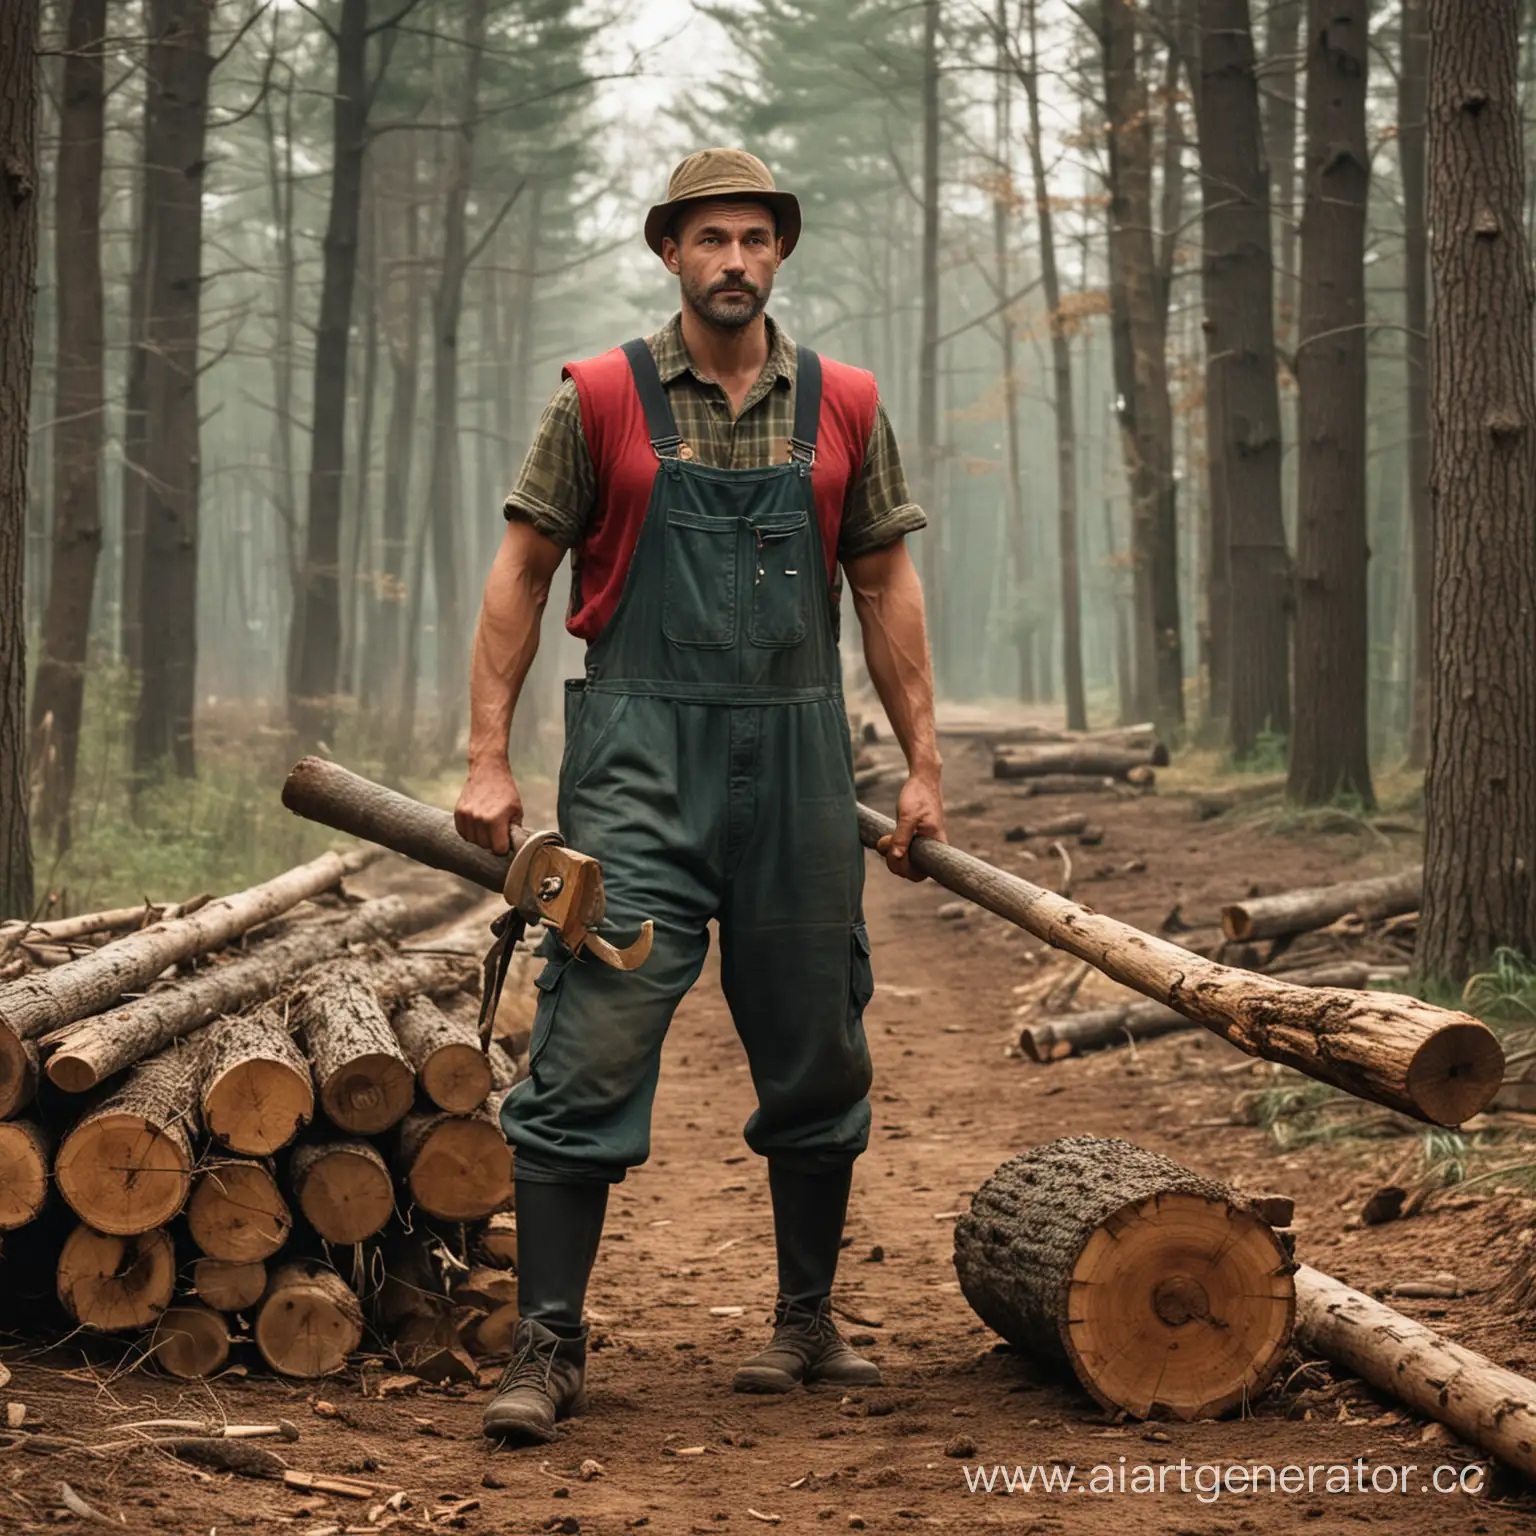 Skilled-Woodcutter-Crafting-Timber-in-Serene-Forest-Setting